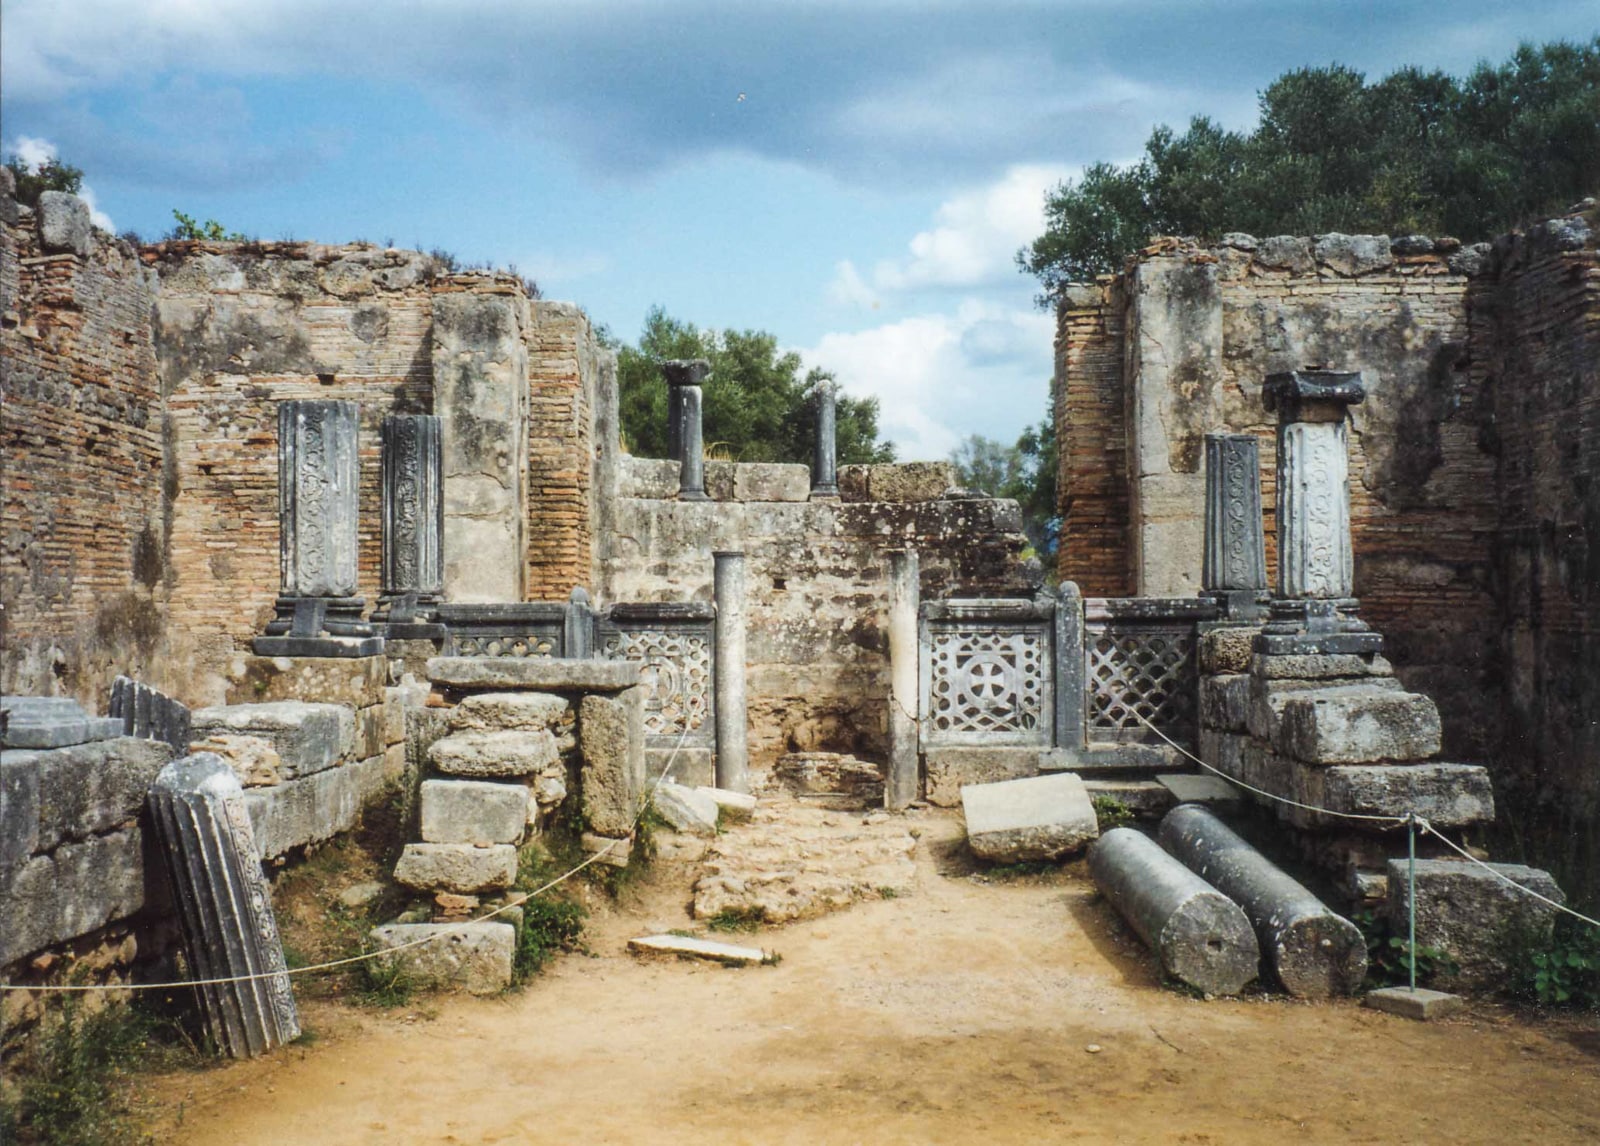 Workshop of Pheidias, where the statue supposedly was built. Photo by Alun Salt.